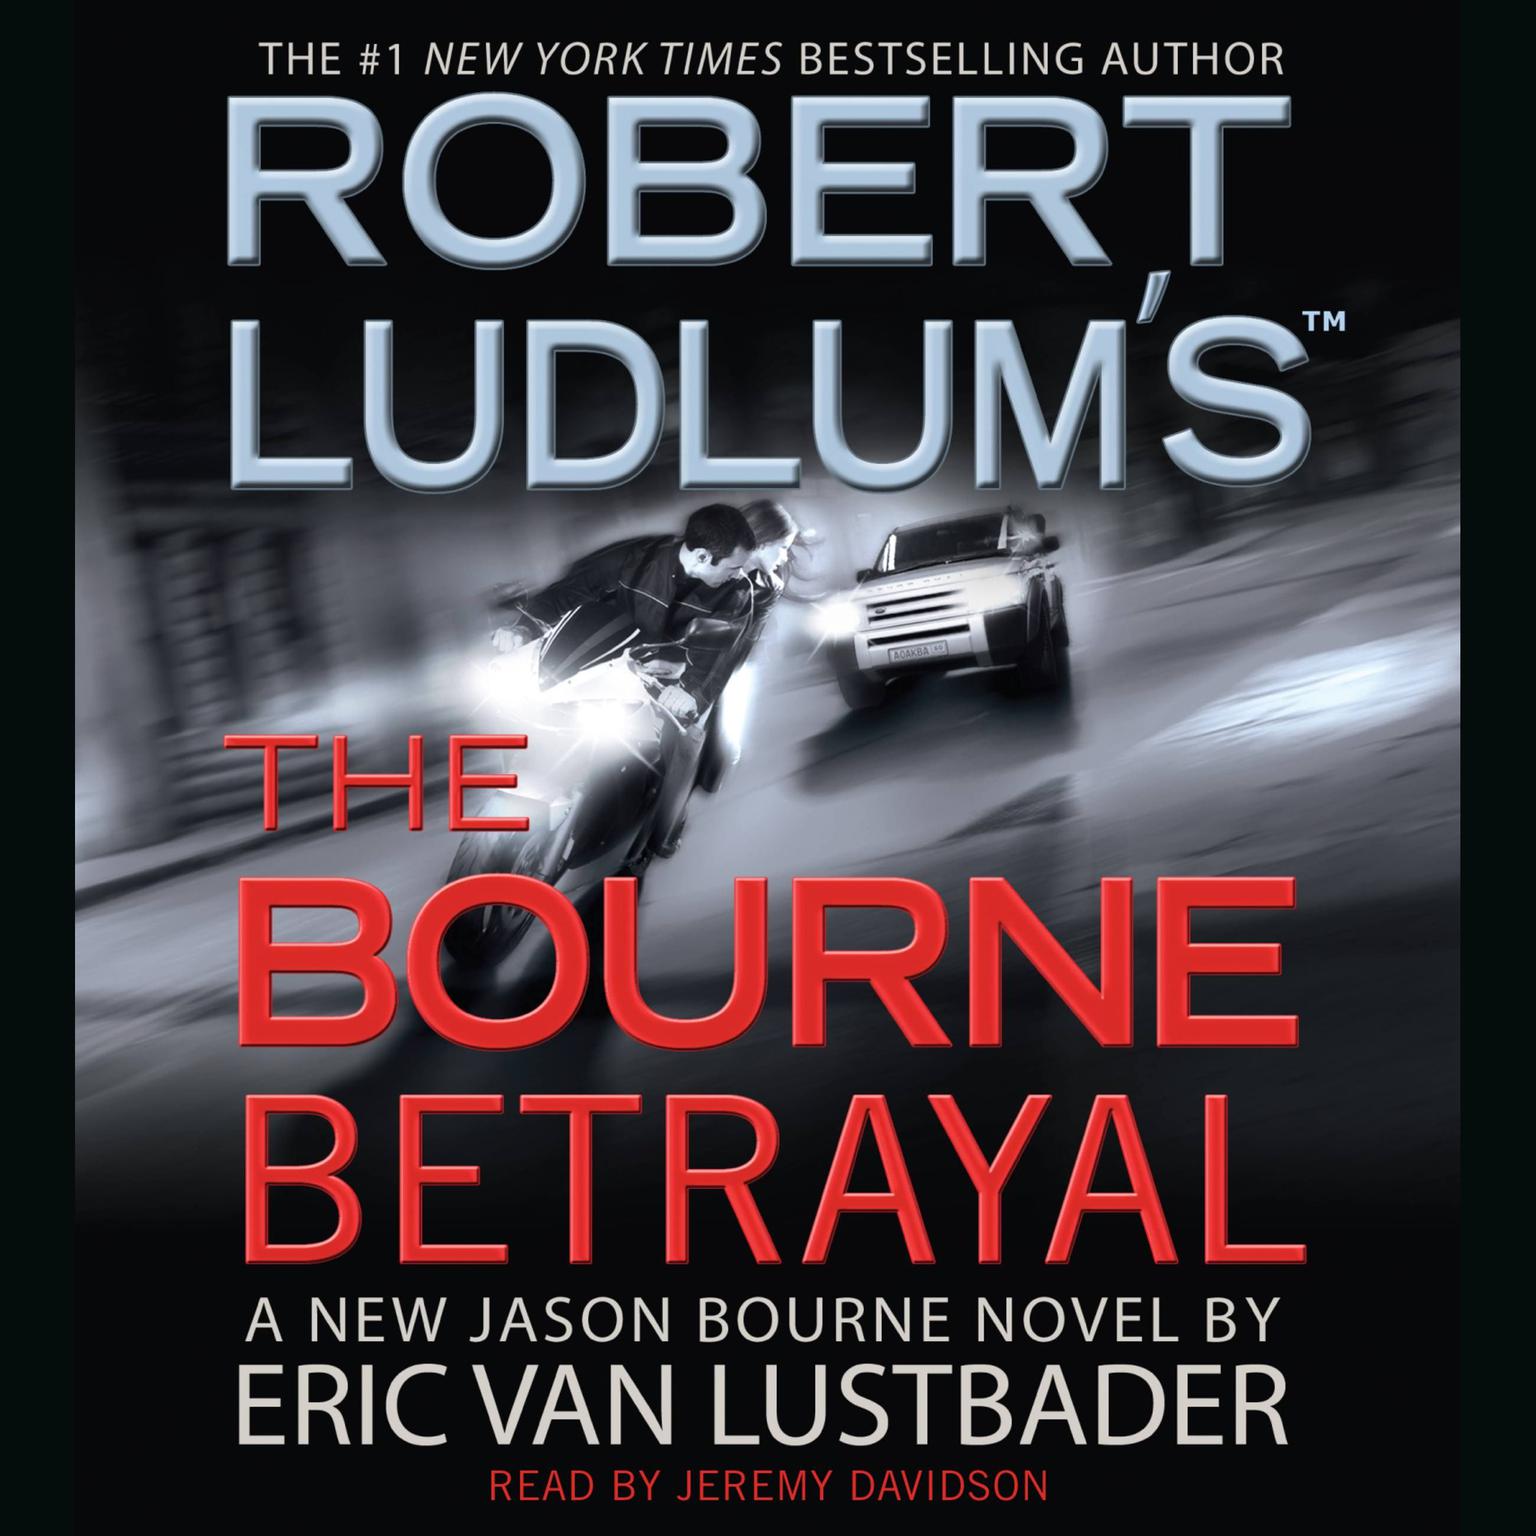 Robert Ludlums (TM) The Bourne Betrayal (Abridged) Audiobook, by Eric Van Lustbader